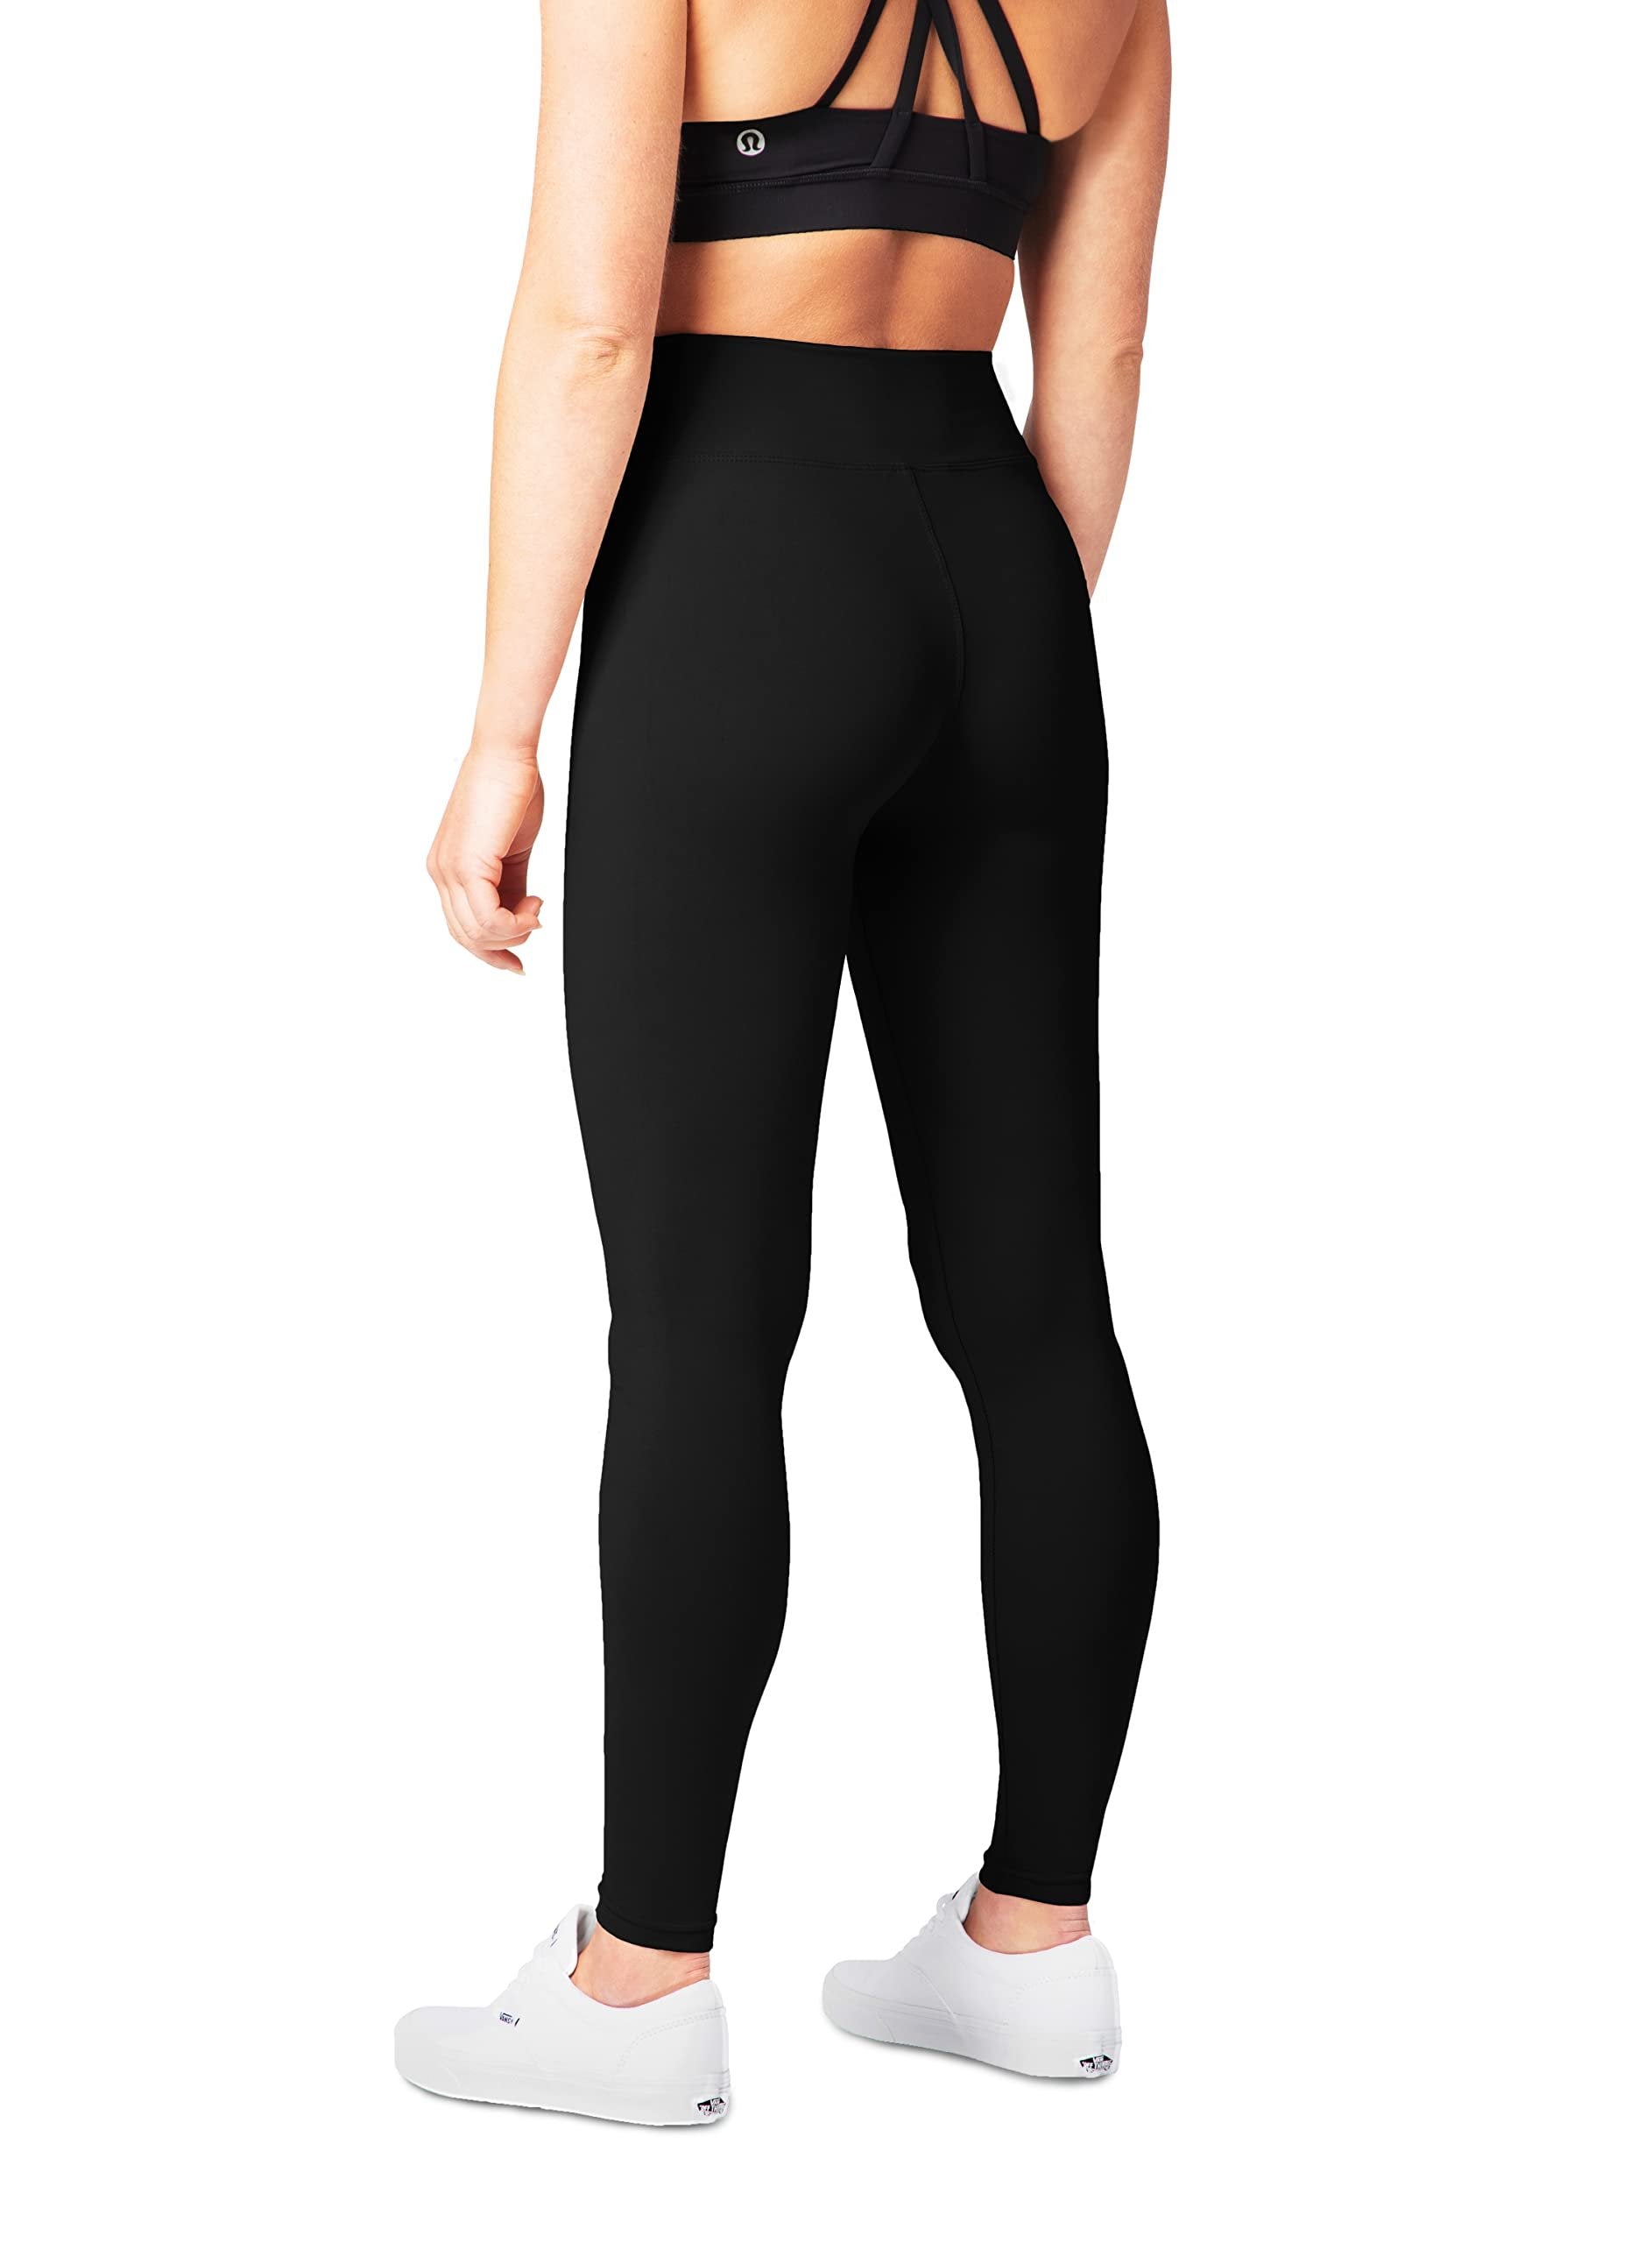 New SATINA High Waisted Plus Size Black Leggings for Women | 3 Inch Waistband | Free Shipping